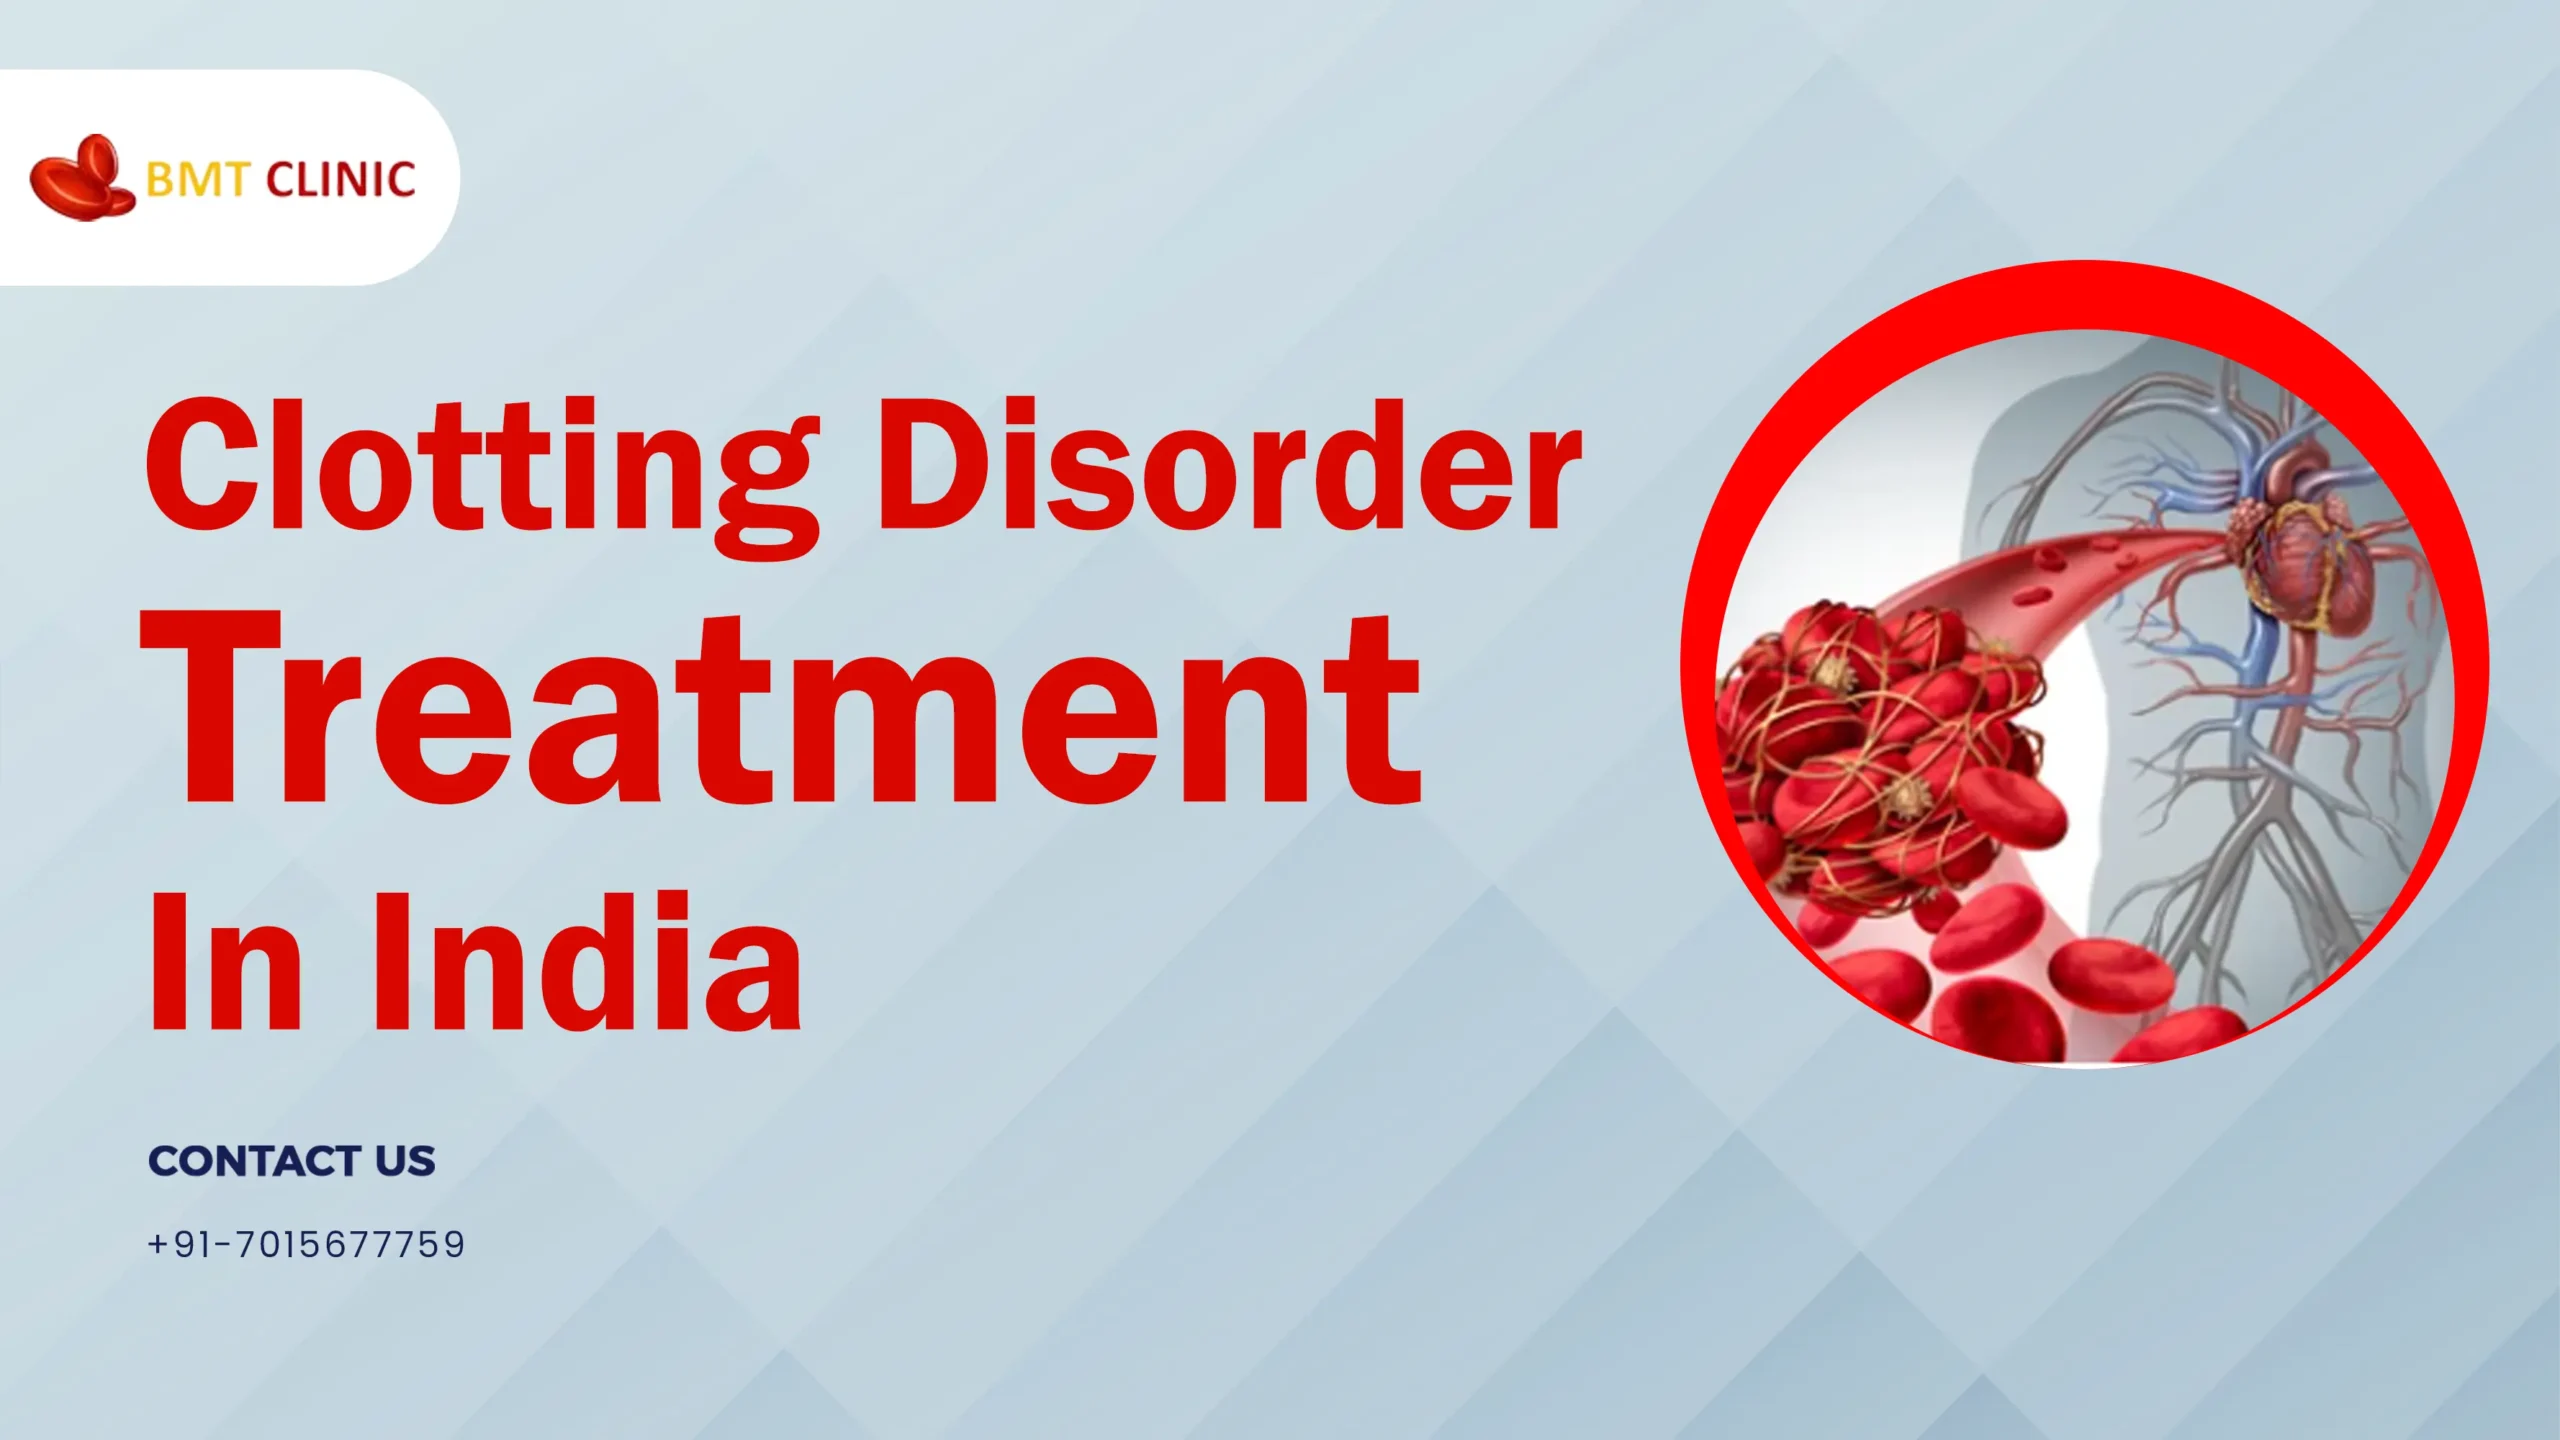 Clotting Disorder Treatment Cost in India